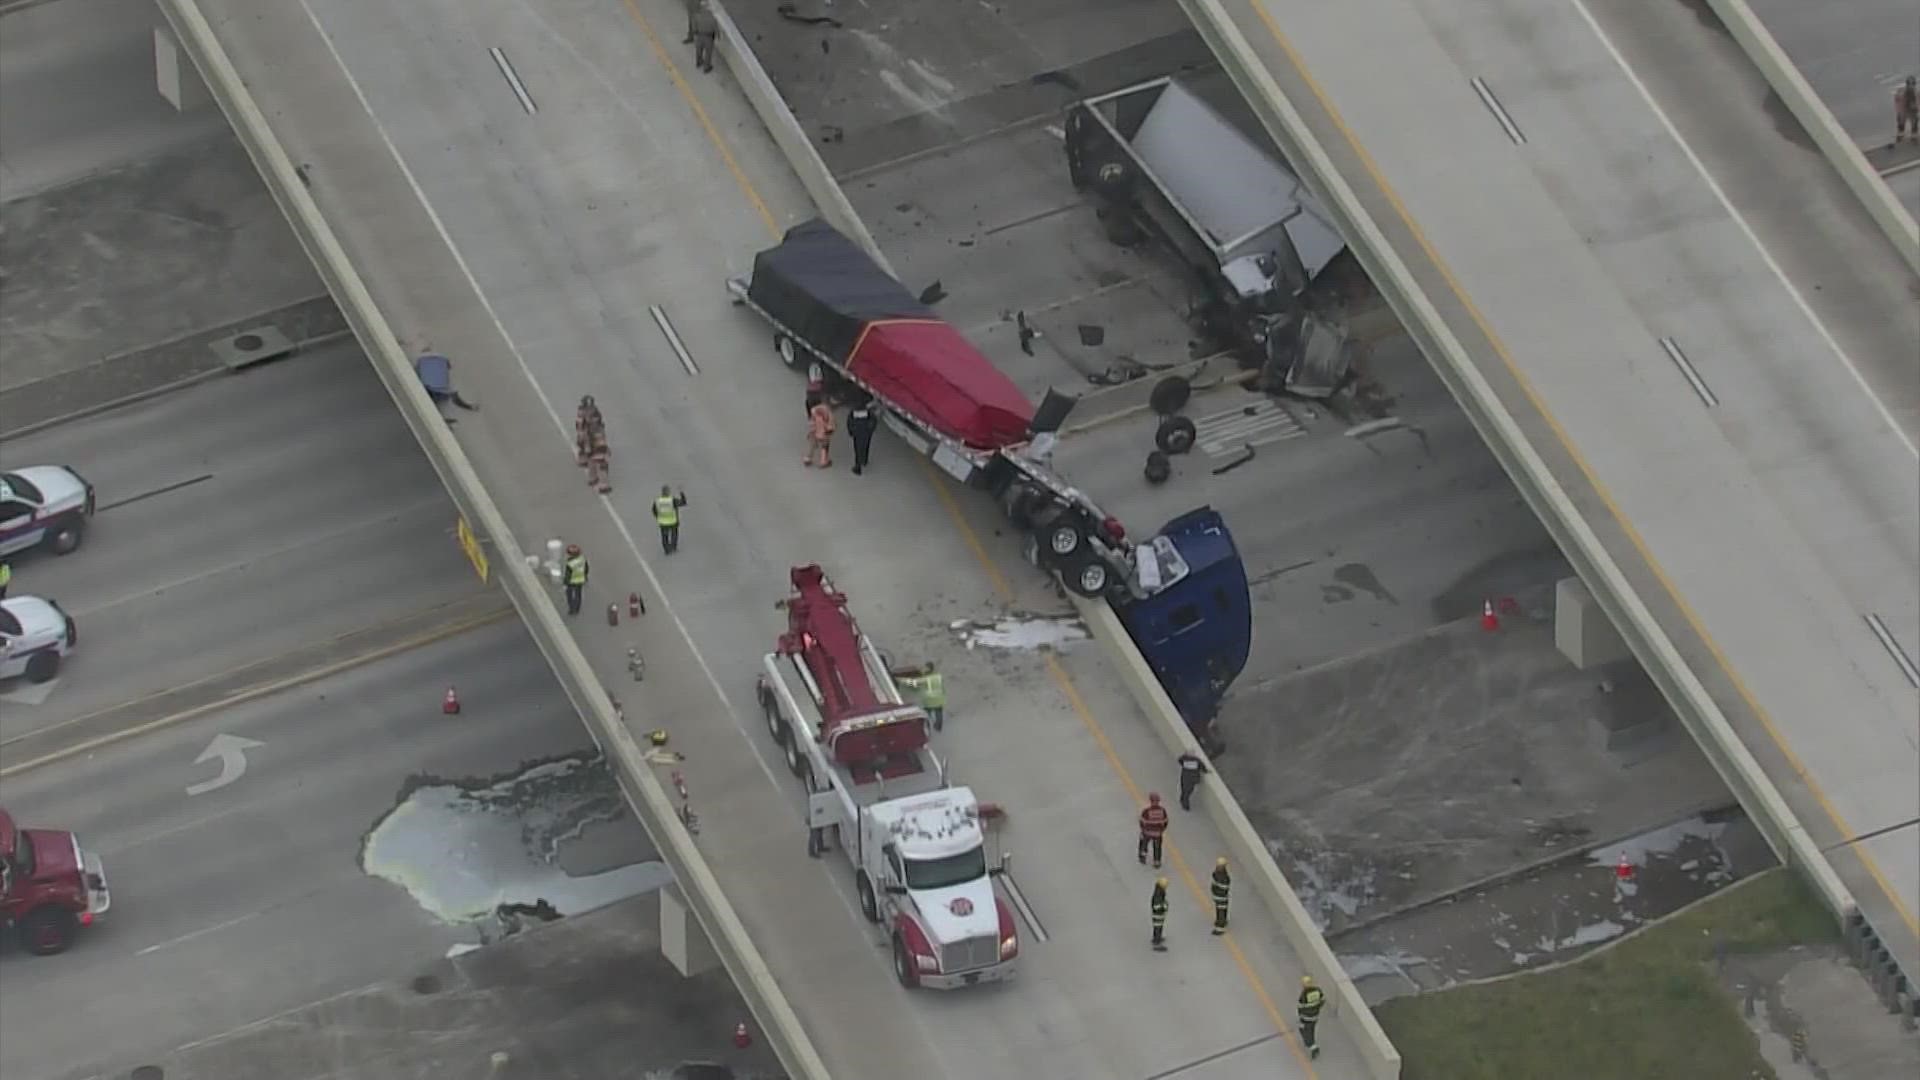 The driver of the box truck is in critical condition, meanwhile, the big rig driver only sustained minor injuries.